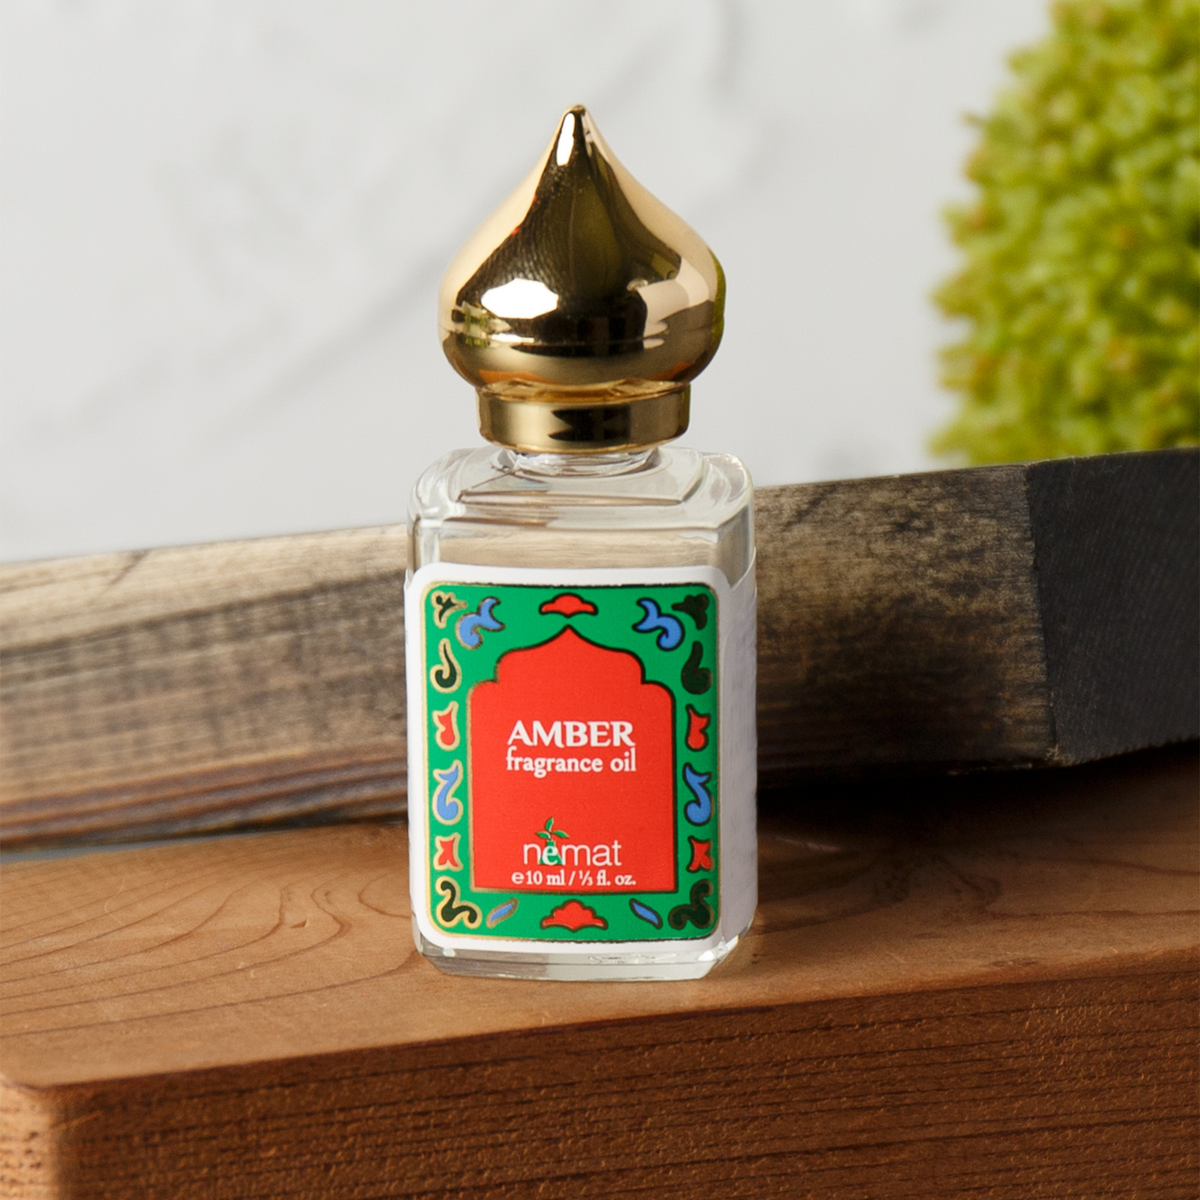 Amber Perfume Oil at Whole Foods Market